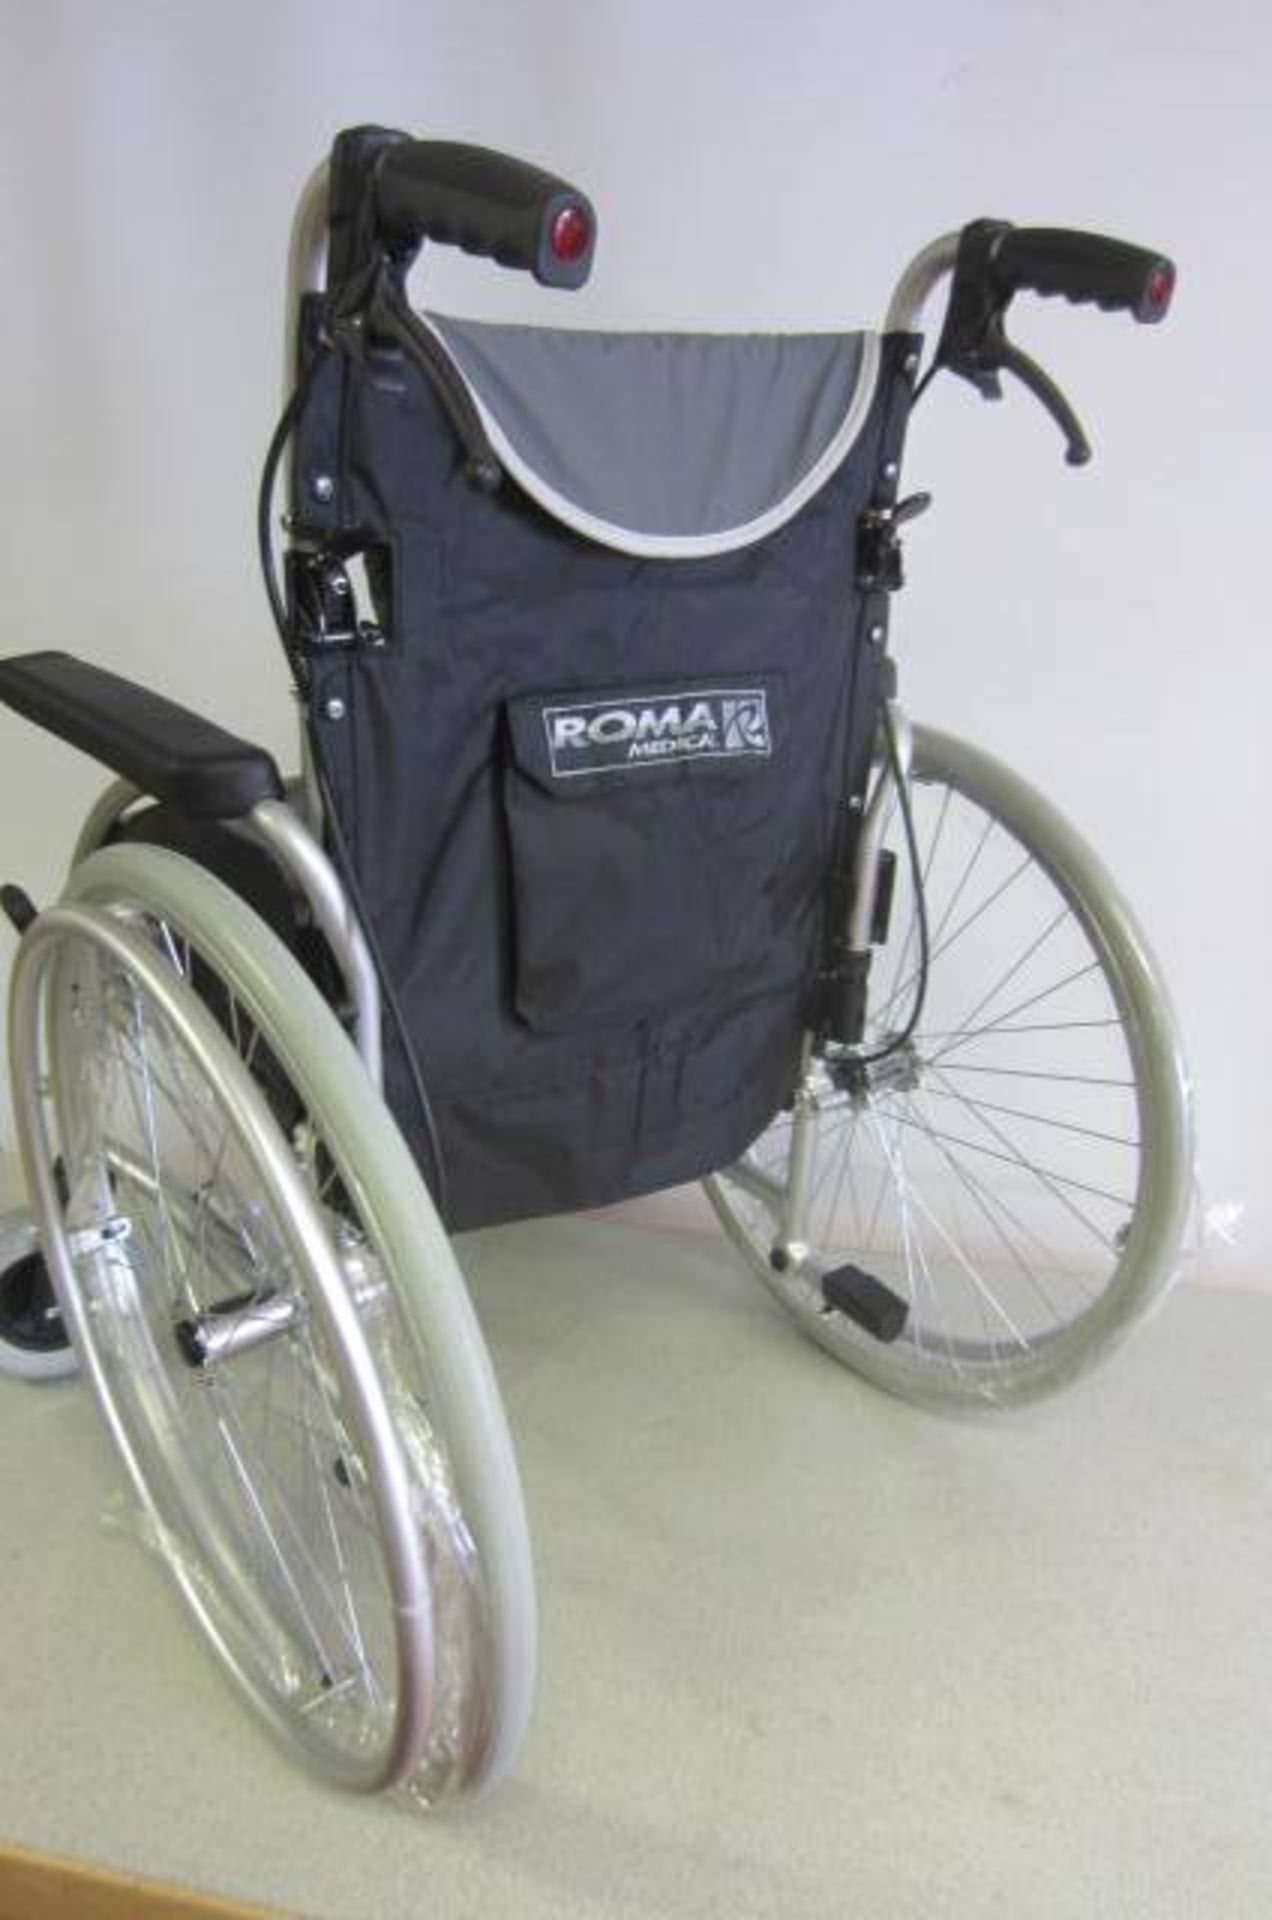 Roma Medical Orbit Light Weight Wheel Chair, Model 1300. In Box As New. RRP £279.00 - Image 3 of 3